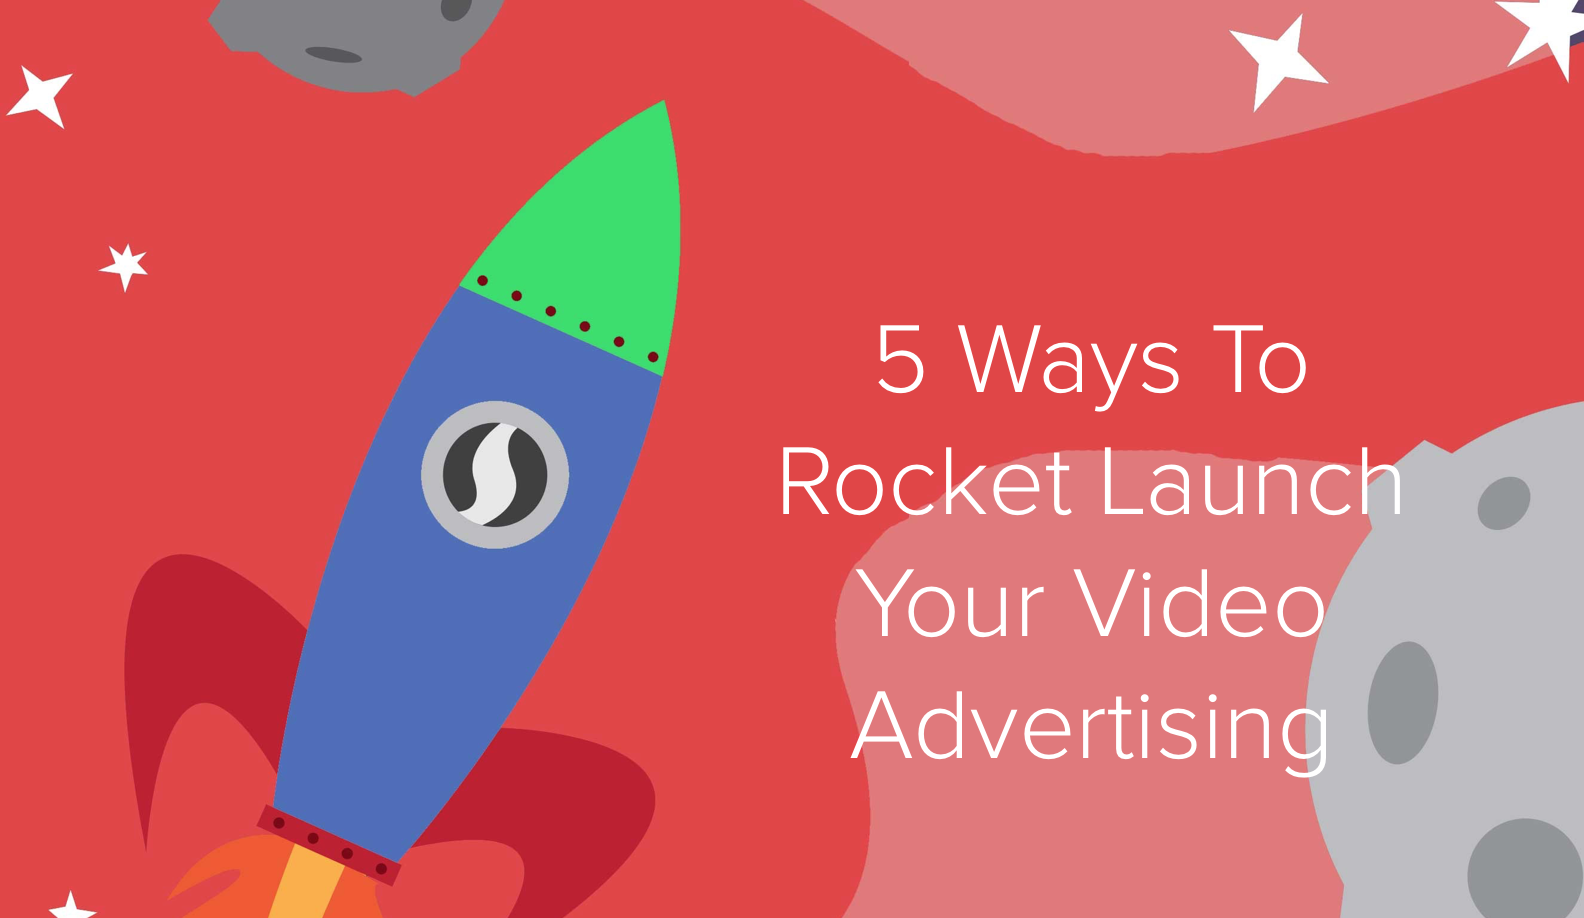 5 Ways to Rocket Launch Your Video Advertising.